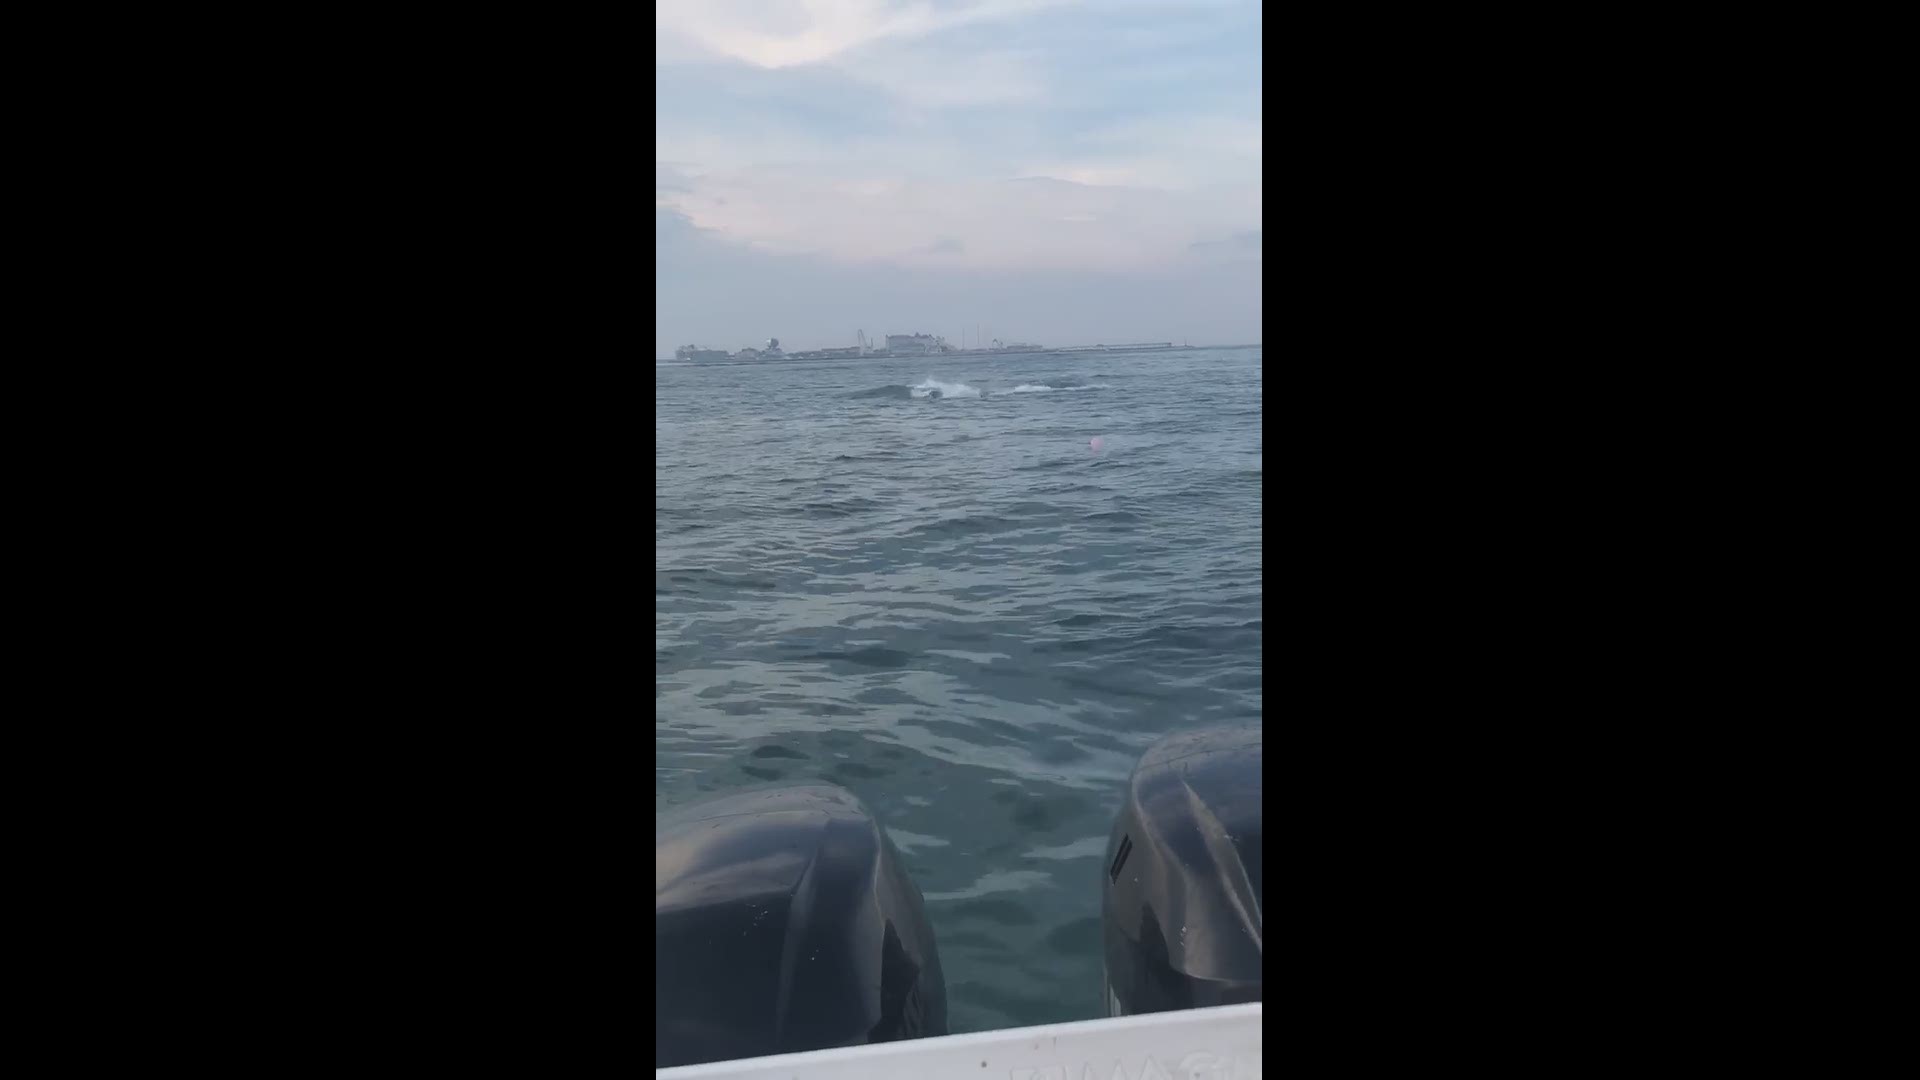 A whale was spotted off the coast of Ocean City, Maryland on June 17.